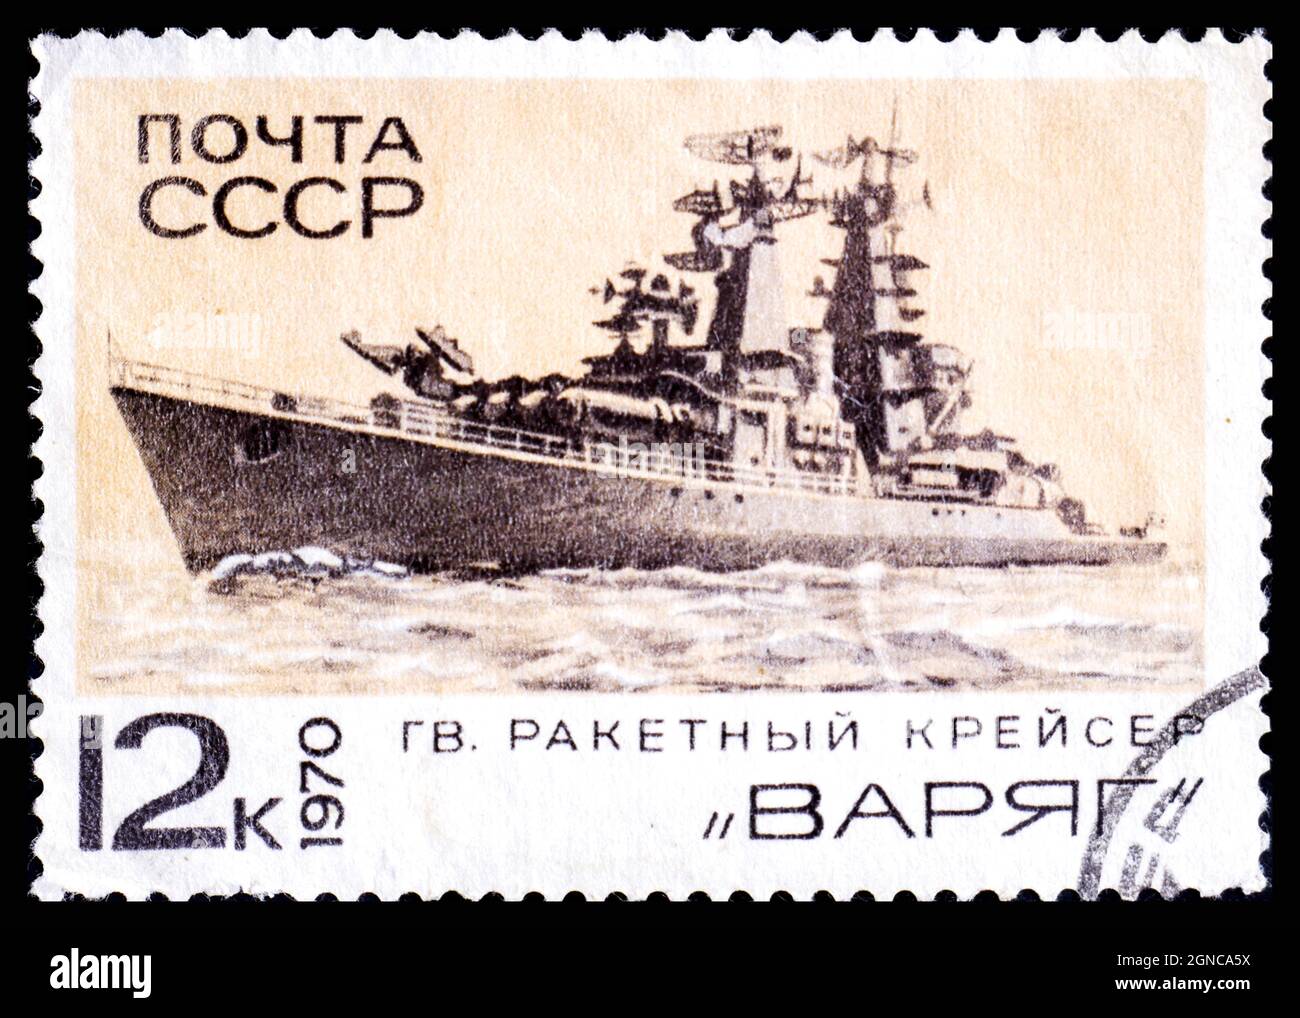 USSR - CIRCA 1970: A postage stamp printed in the USSR shows missile cruiser Varangian series of images History and development Soviet military navy Stock Photo